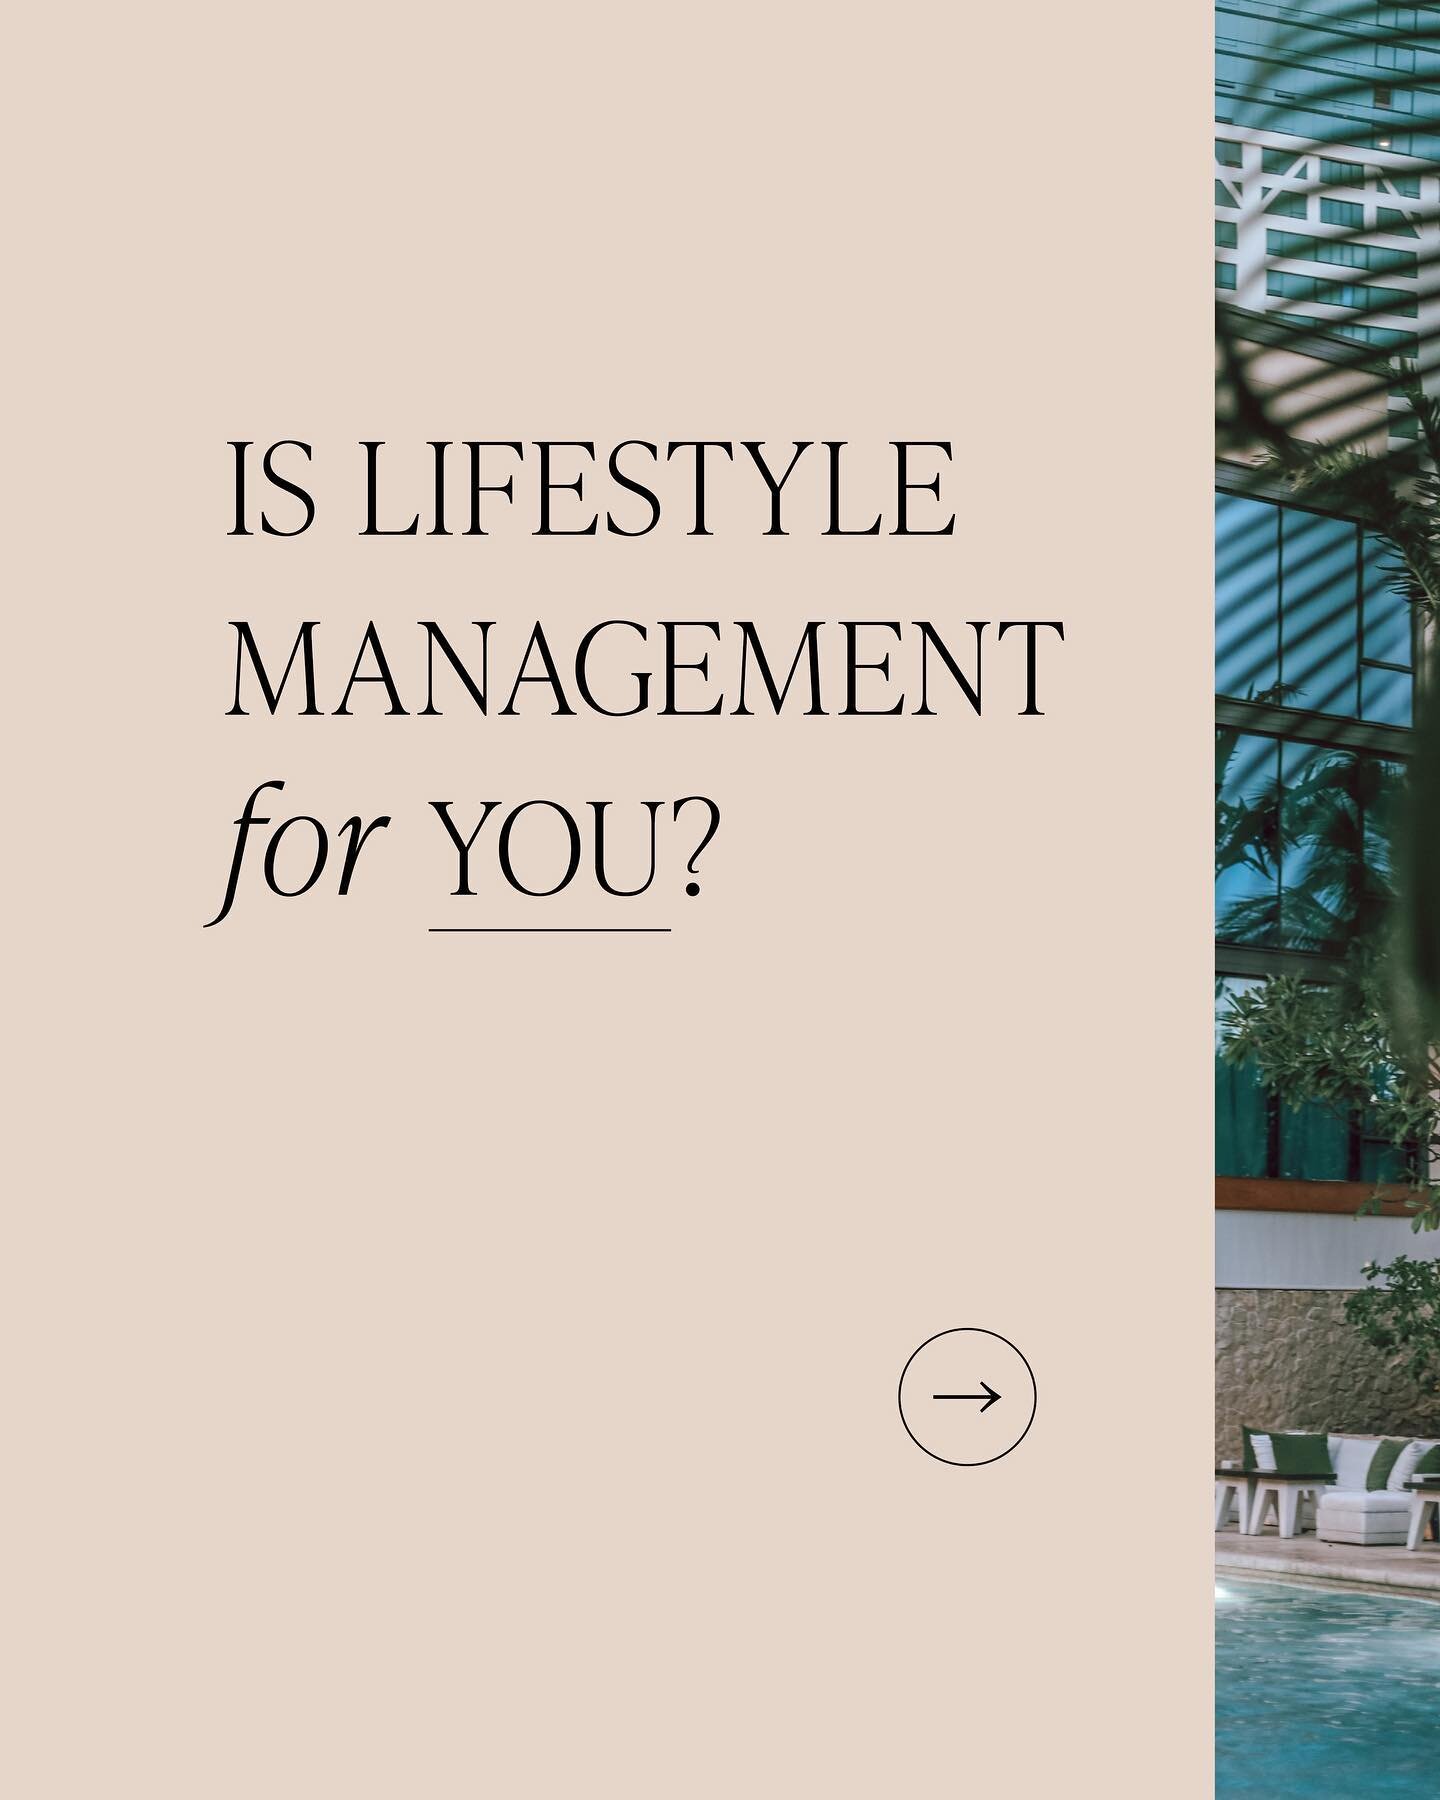 Our concierge team - or who we like to call &ldquo;Life Stylists&rdquo;, have helped our clients lead more fulfilling lives. Learn more about our typical clientele and the levels of management services we provide.